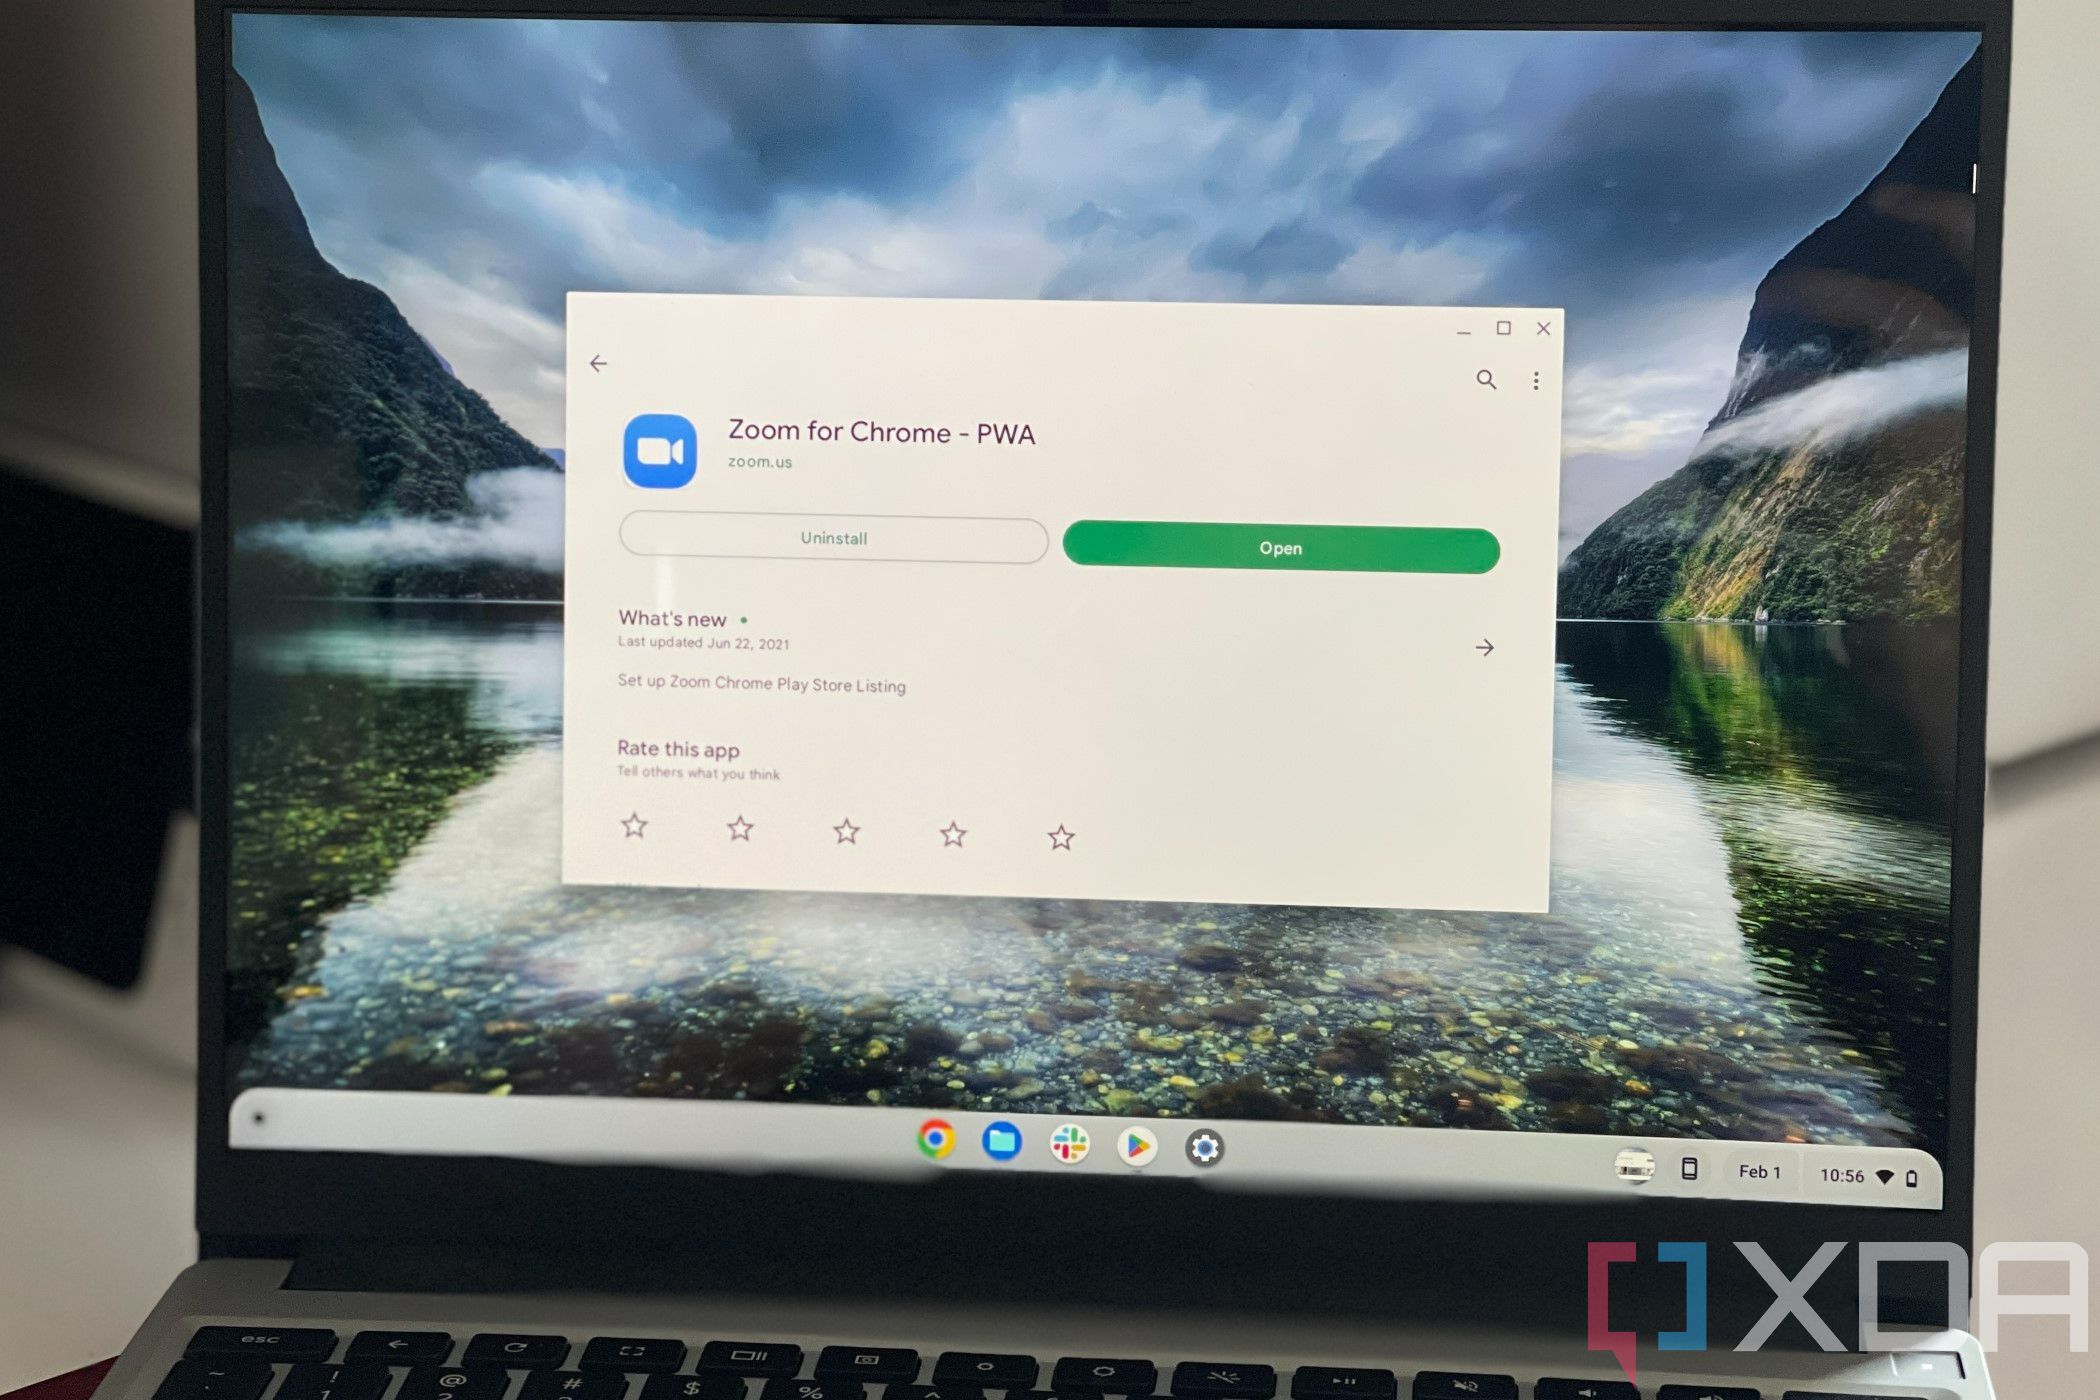 How to use the Zoom app on a Chromebook